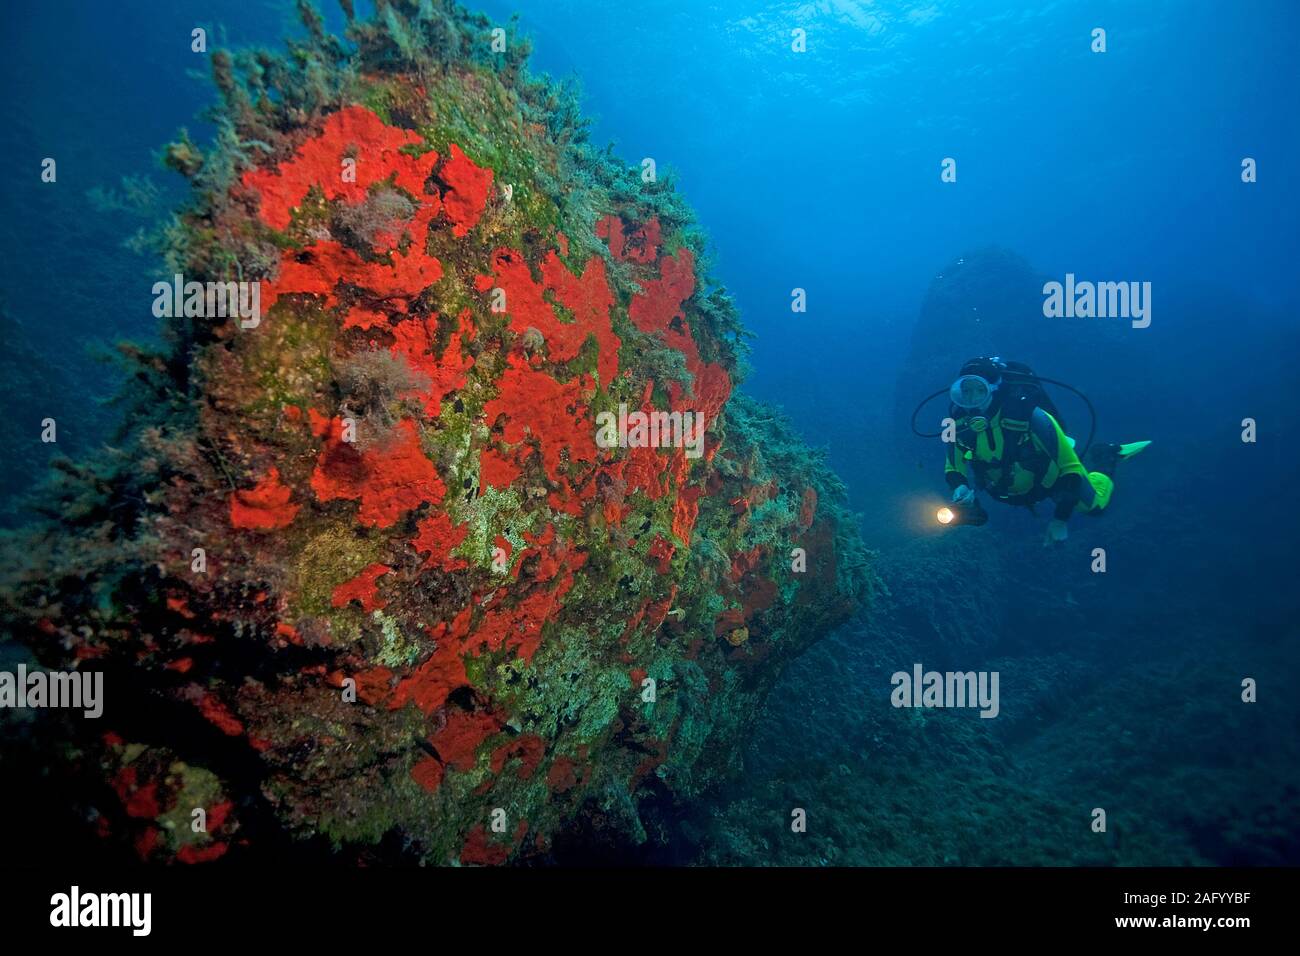 Scuba diver in a mediterranean reef, rocks overcrusted with red sponges, Zakynthos, island, Greece Stock Photo